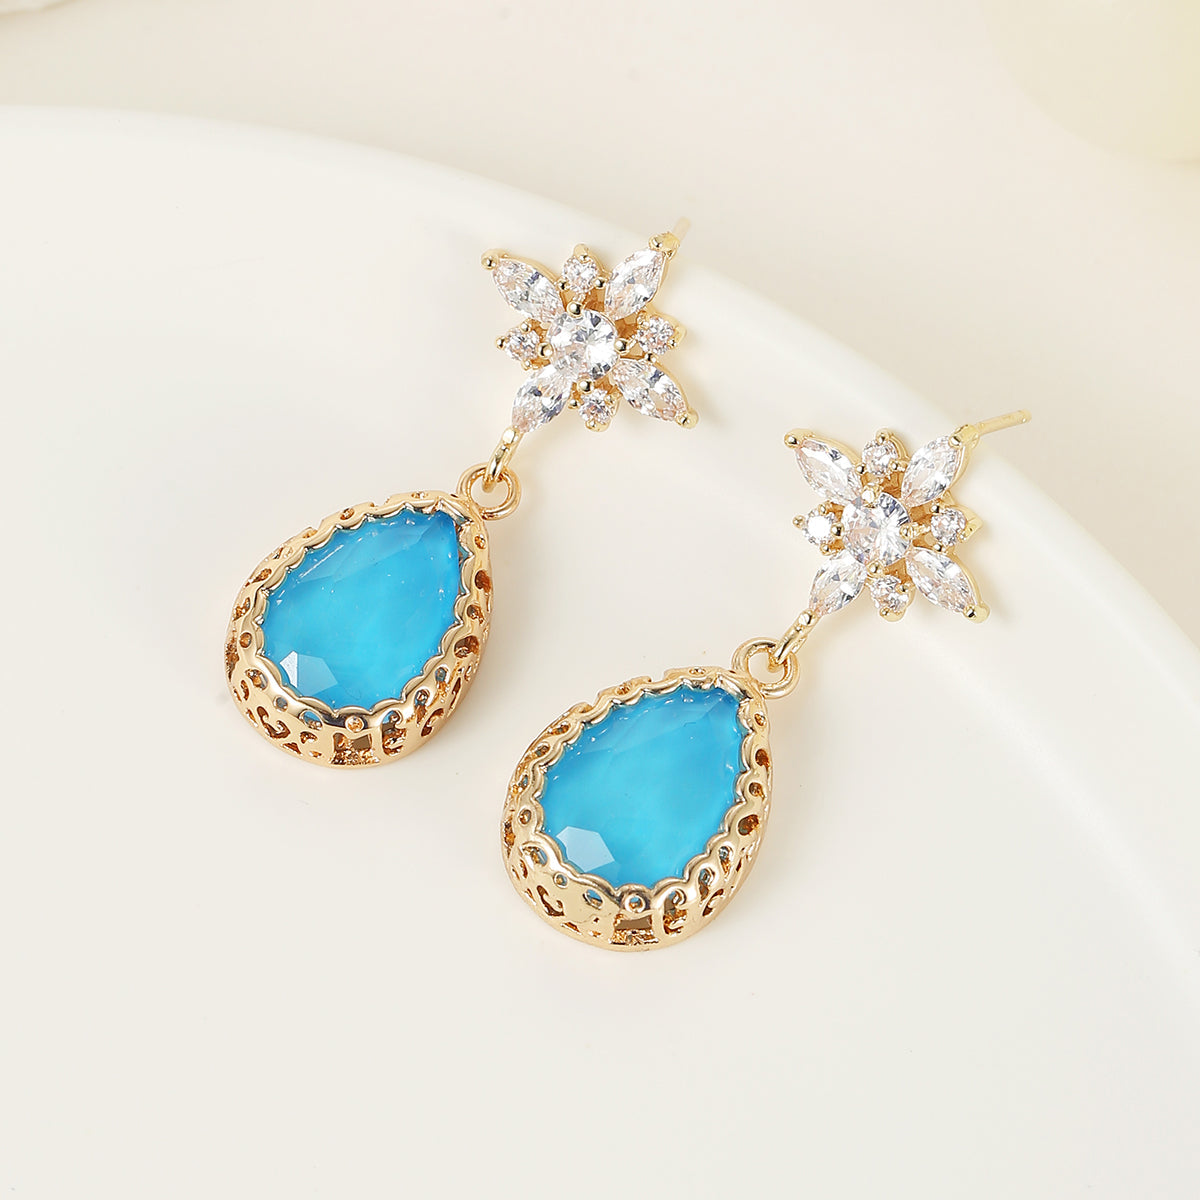 Blue Crystal & Cubic Zirconia 18K Gold-Plated Star Drop Earrings